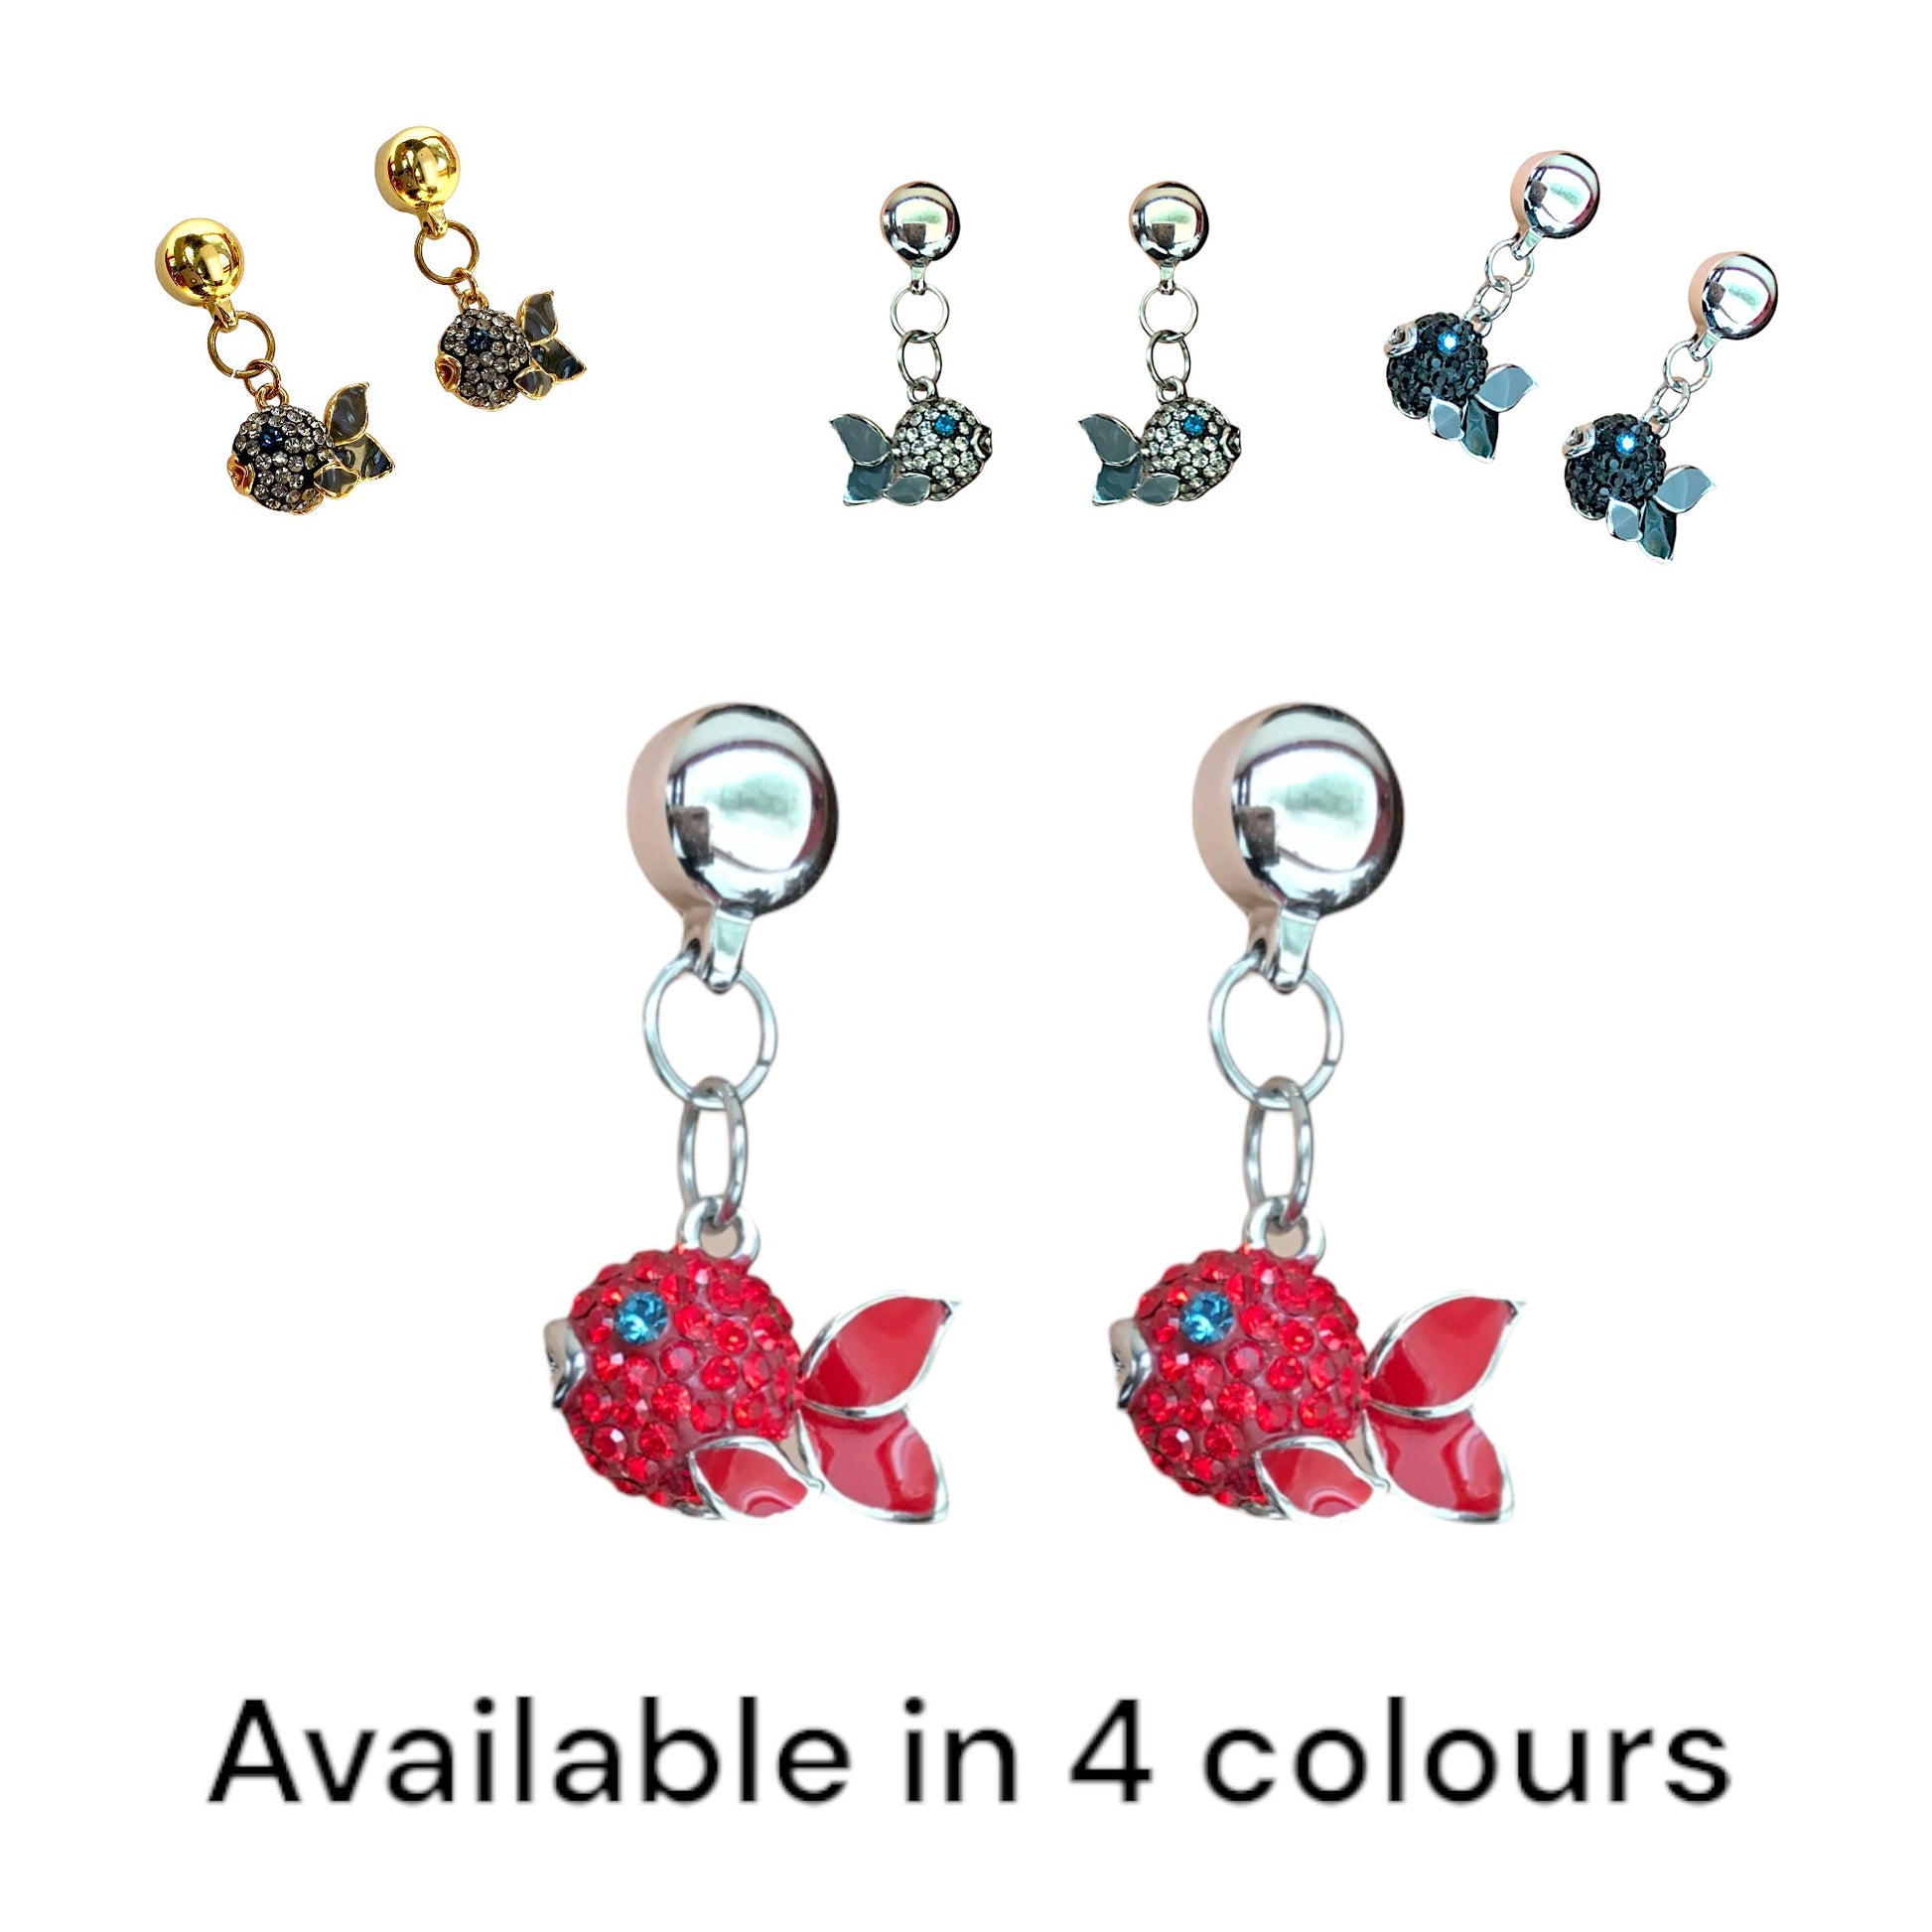 TI-GO Fish Charm earrings. Magnetic titanium interchangeable earring system. Detachable earrings for a truly hypoallergenic jewellery on a white background. in 4 colours